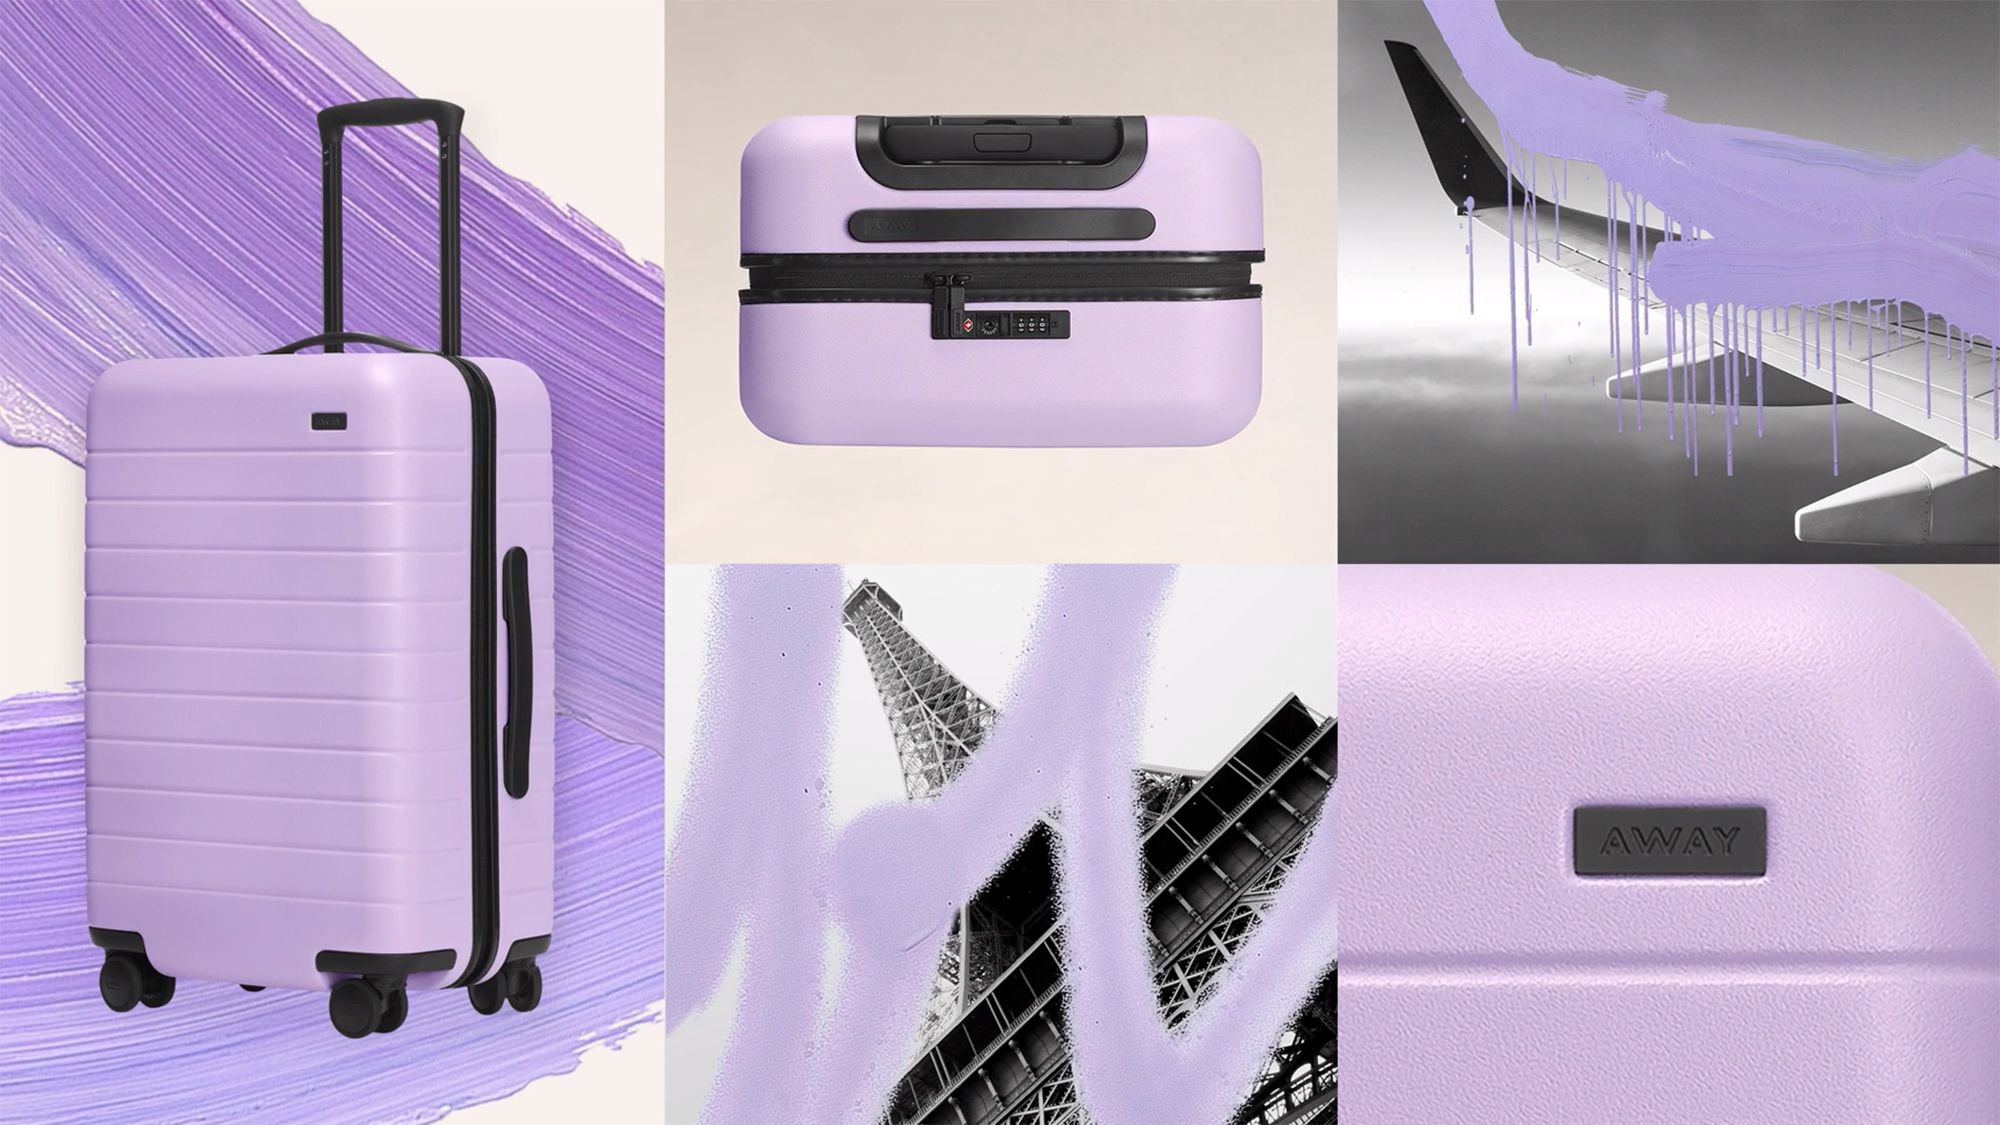 Away Travel relaunches limited-edition lavender luggage